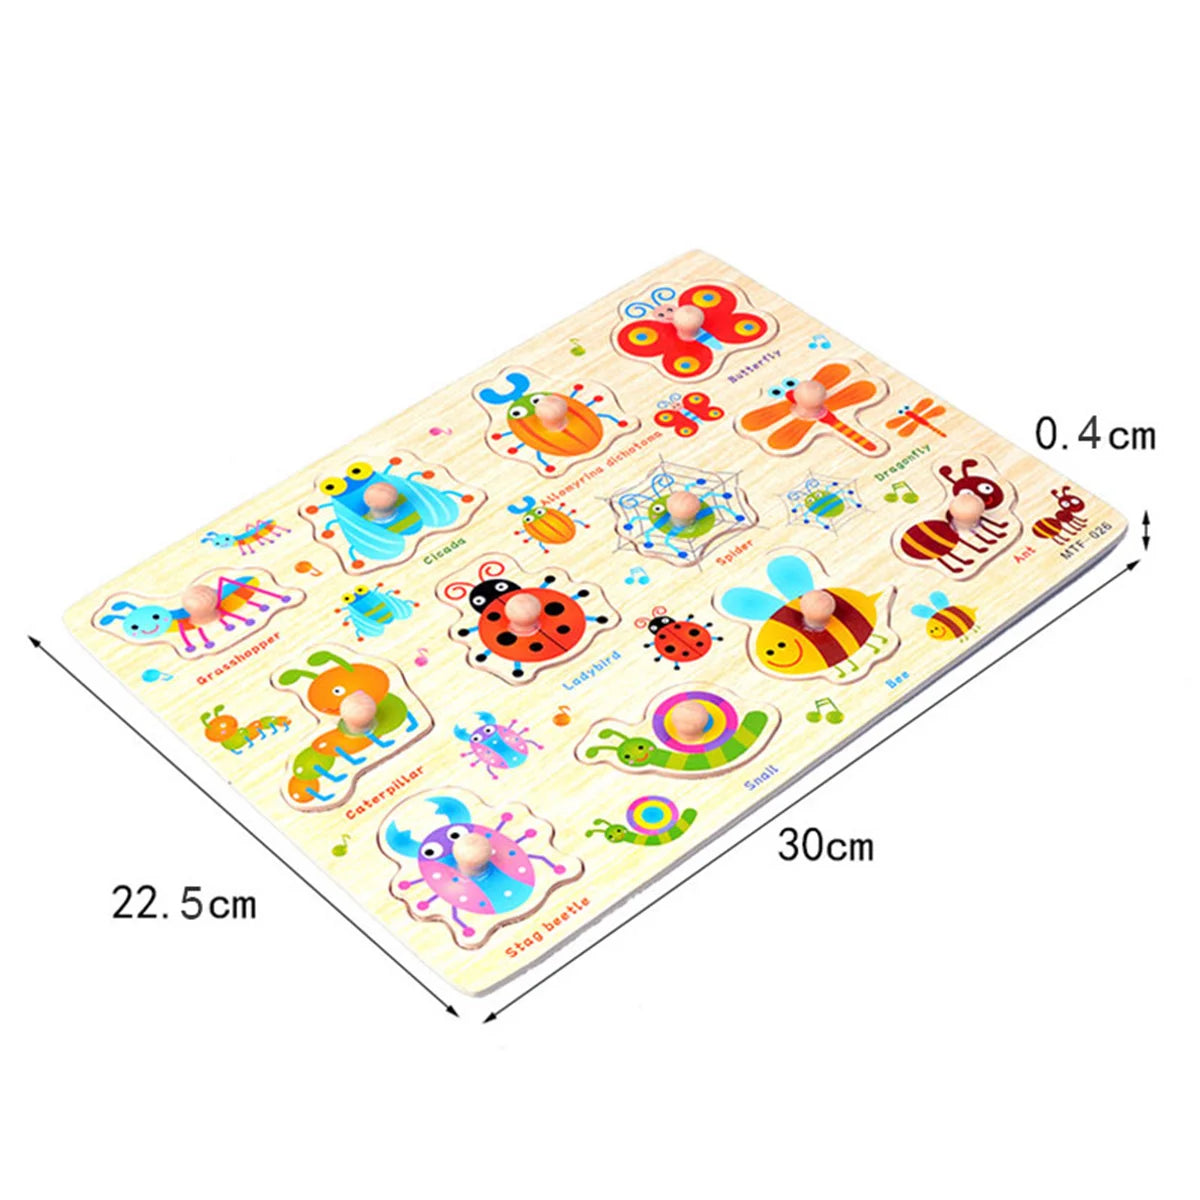 Baby Puzzle For Children Board Jigsaw Wooden Puzzles For Kids 2 3 Year